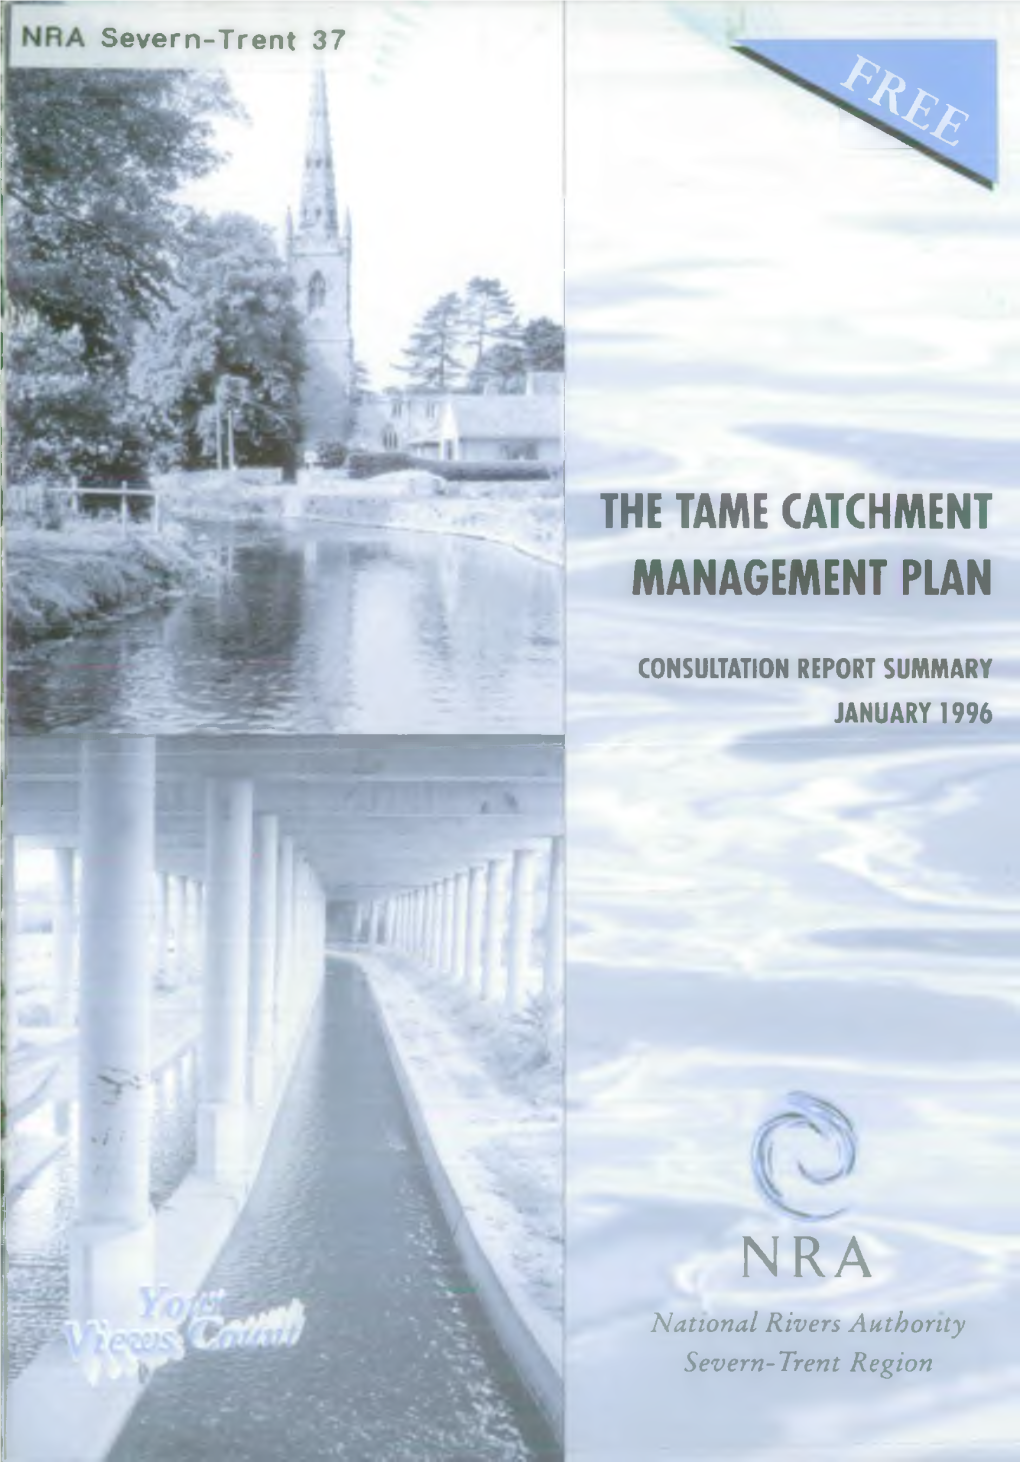 The Tame Catchment Management Plan